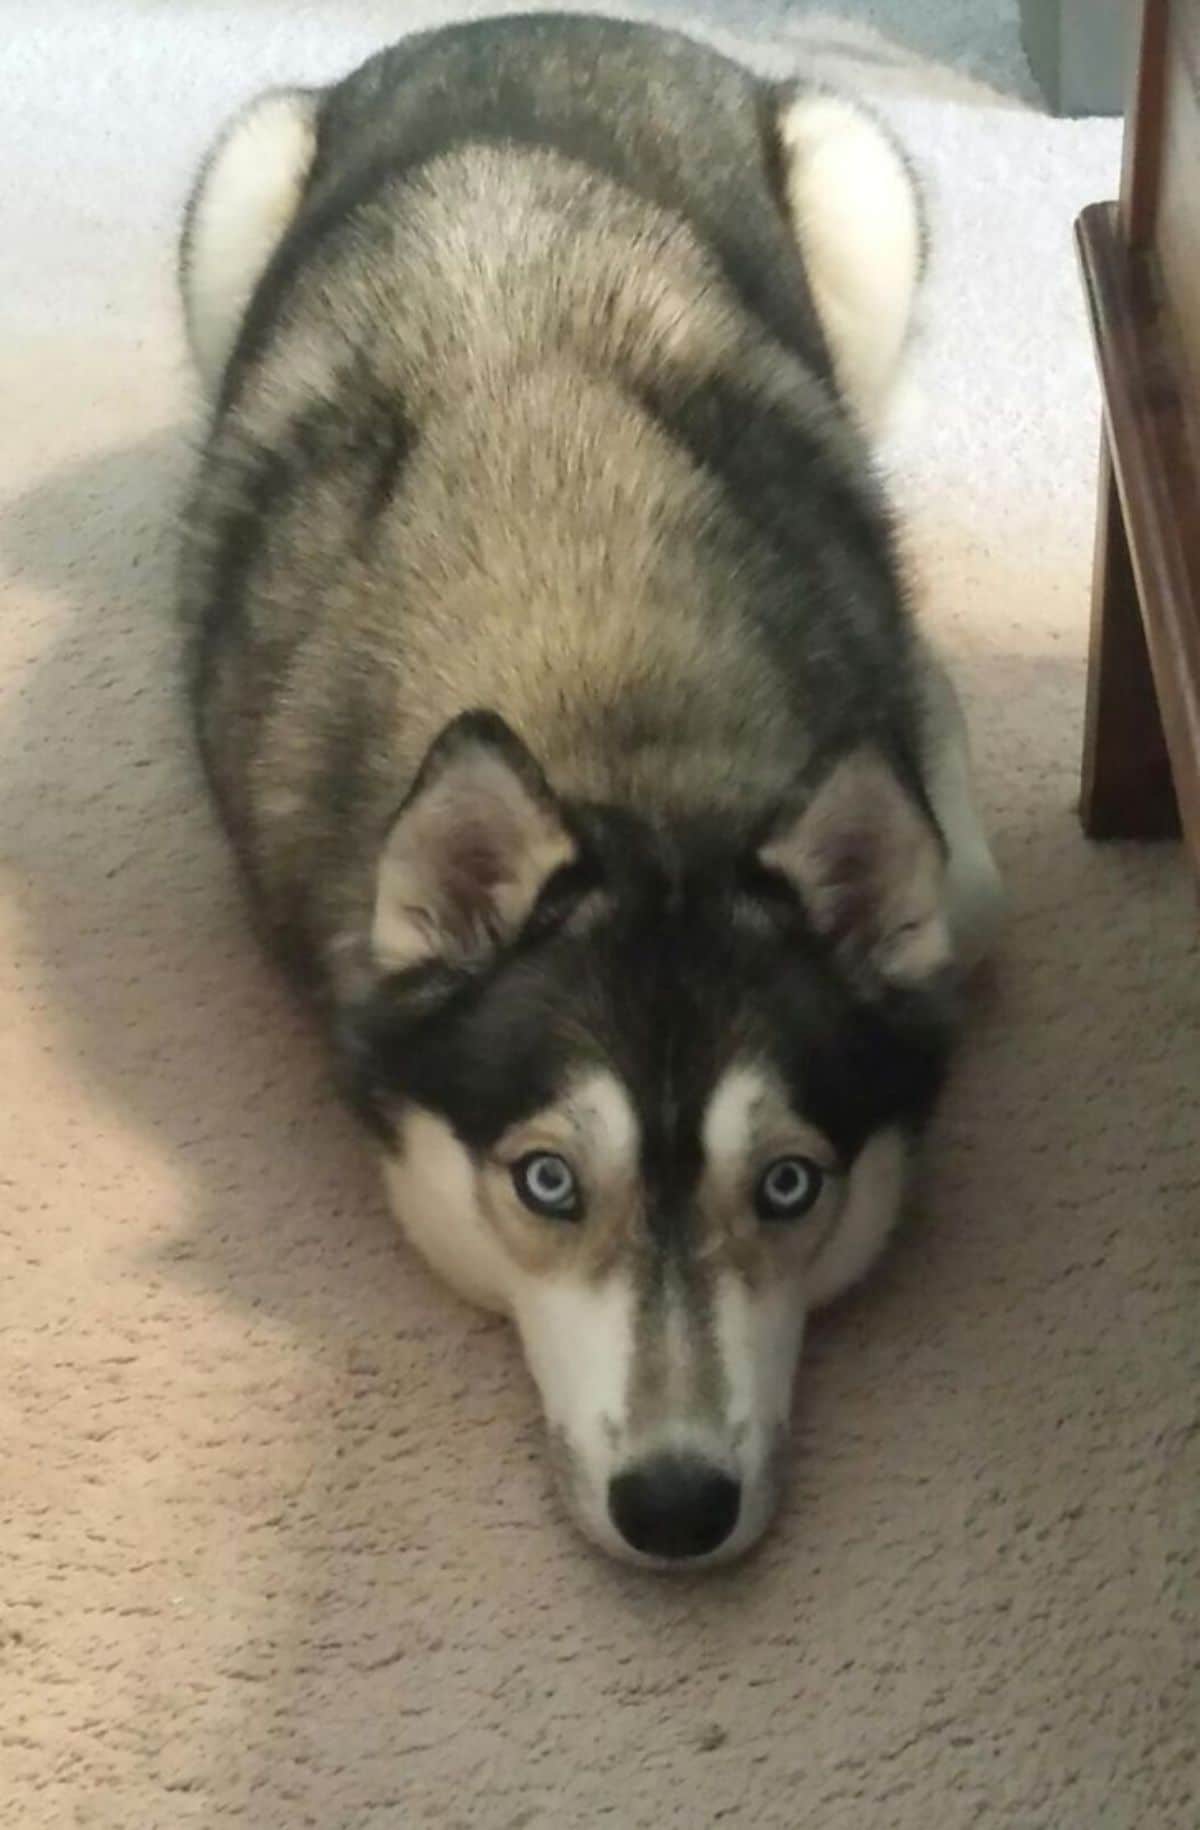 husky laying on a carpet with legs tucked out of sight